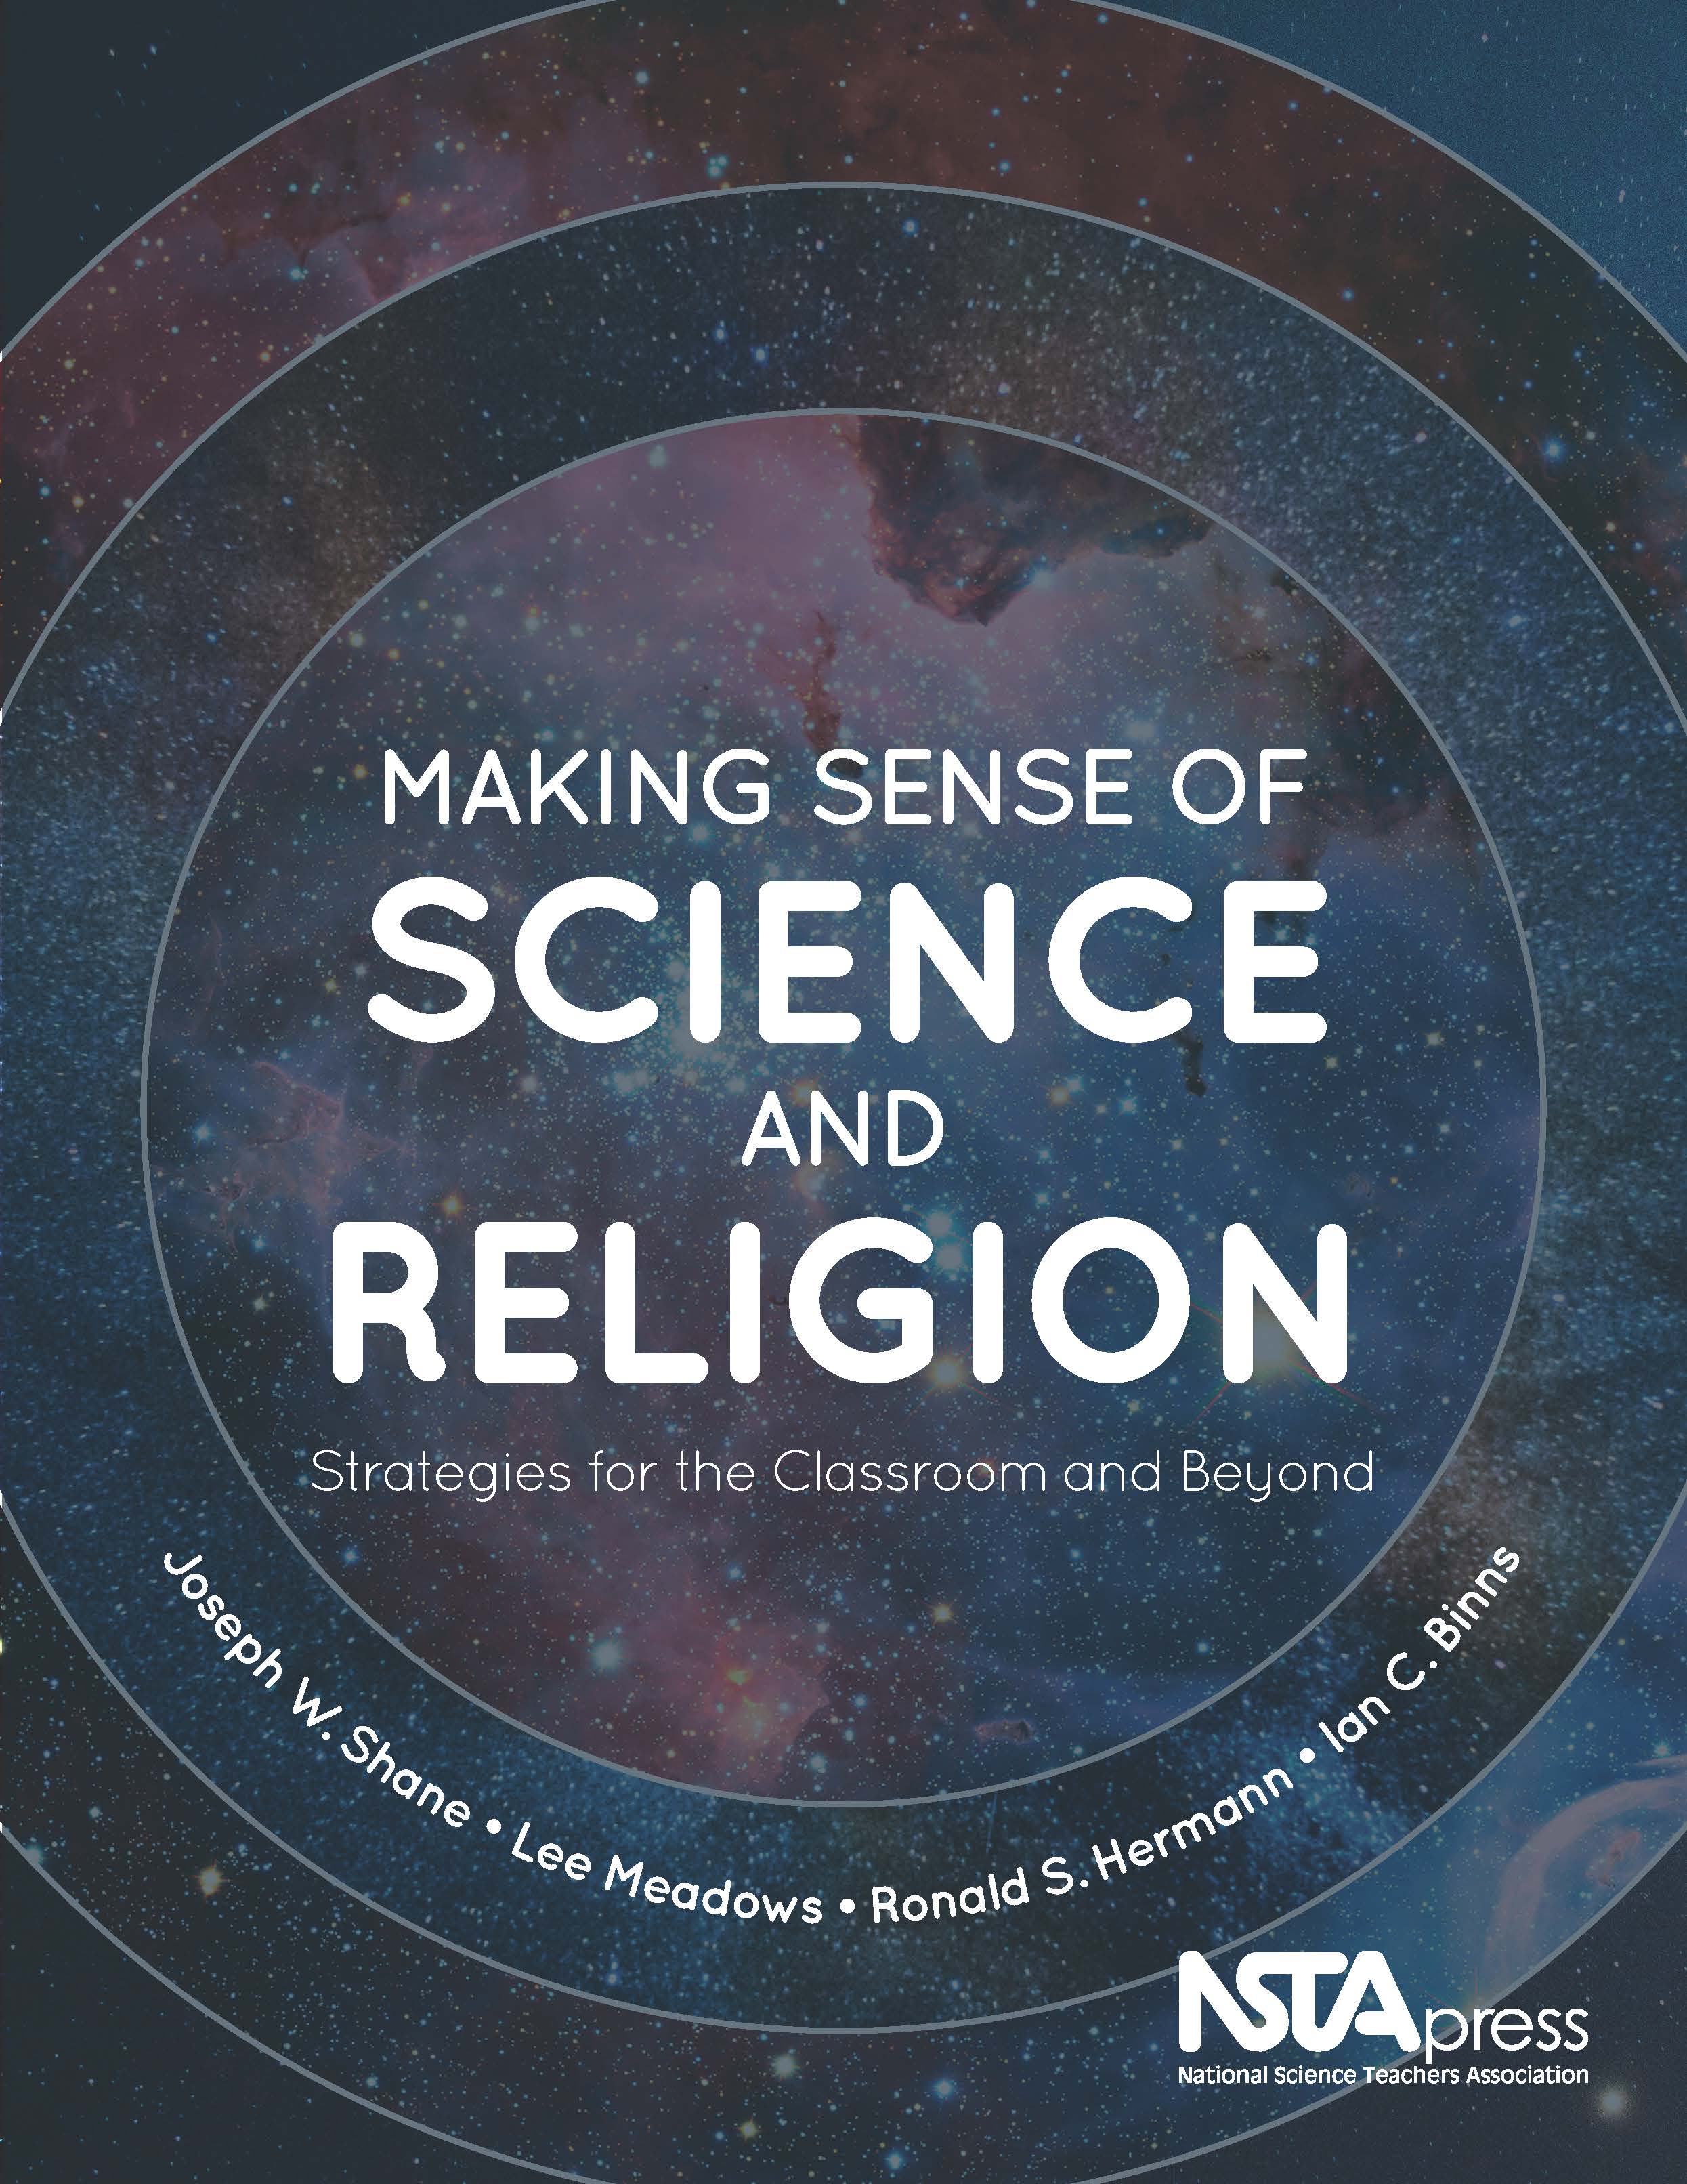 Cover of book "Making Sense of Science and Religion: Strategies for the Classroom and Beyond"